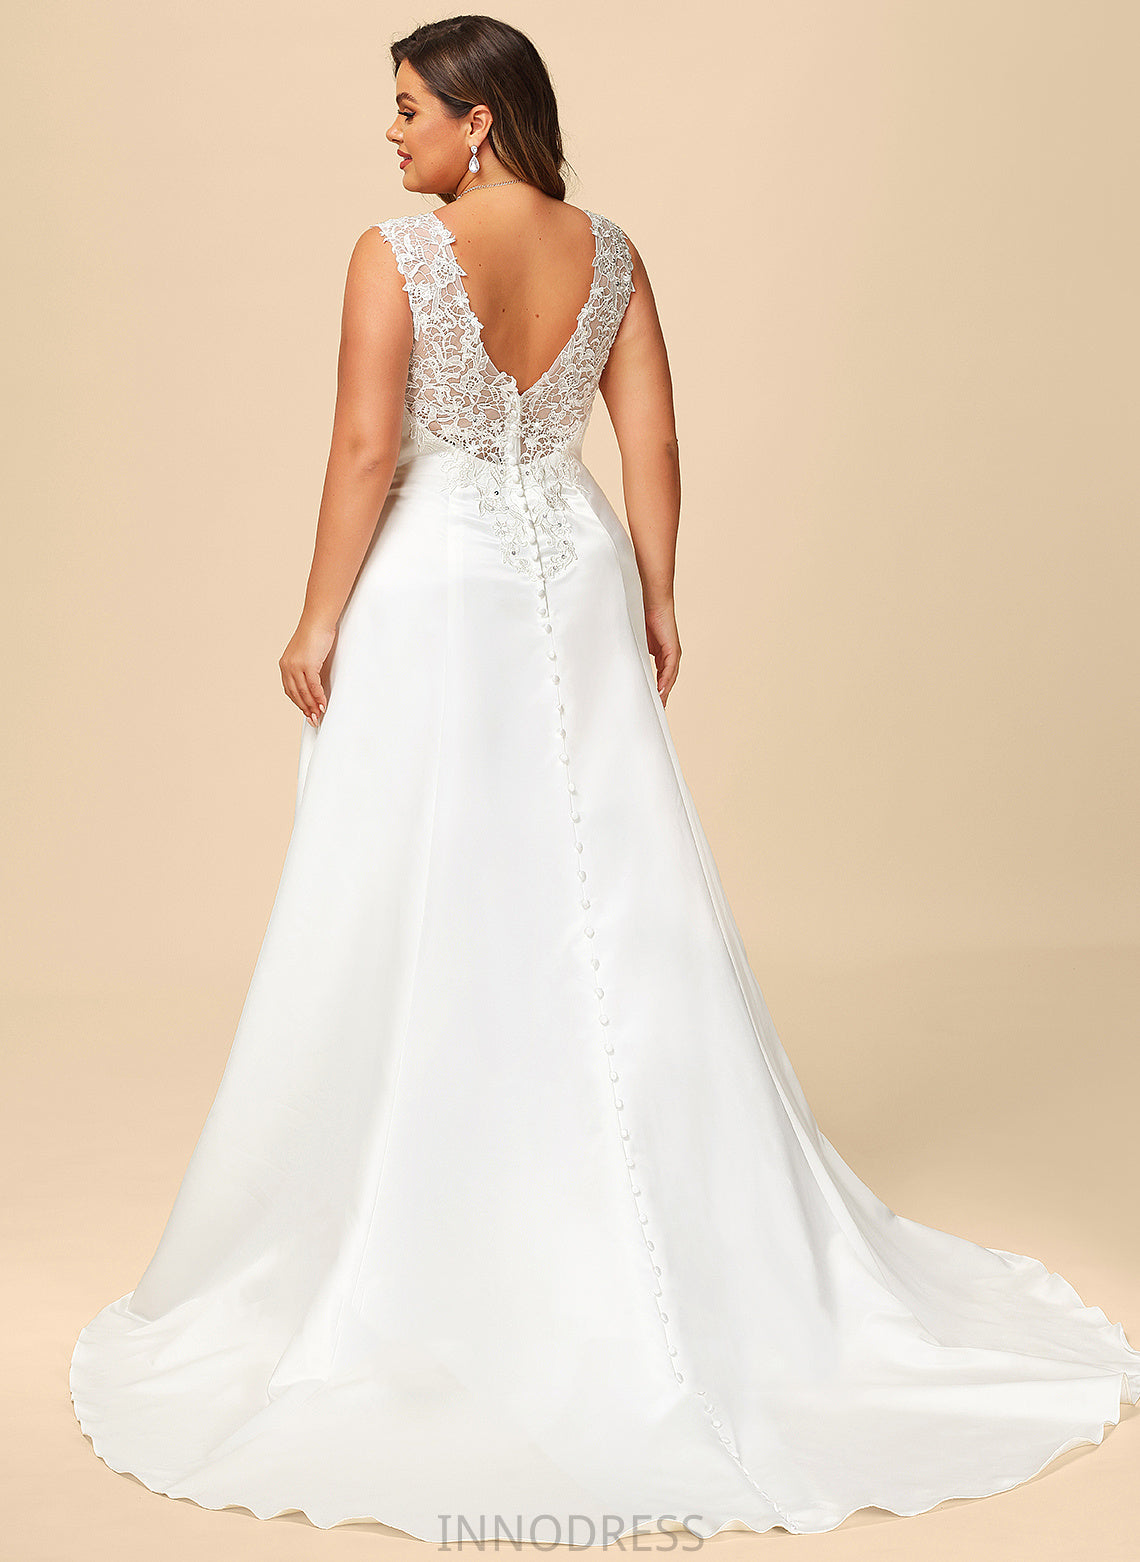 Wedding Dresses Sequins Lace Wedding Ruffle Sweep Kailey With Ball-Gown/Princess Dress V-neck Satin Train Beading